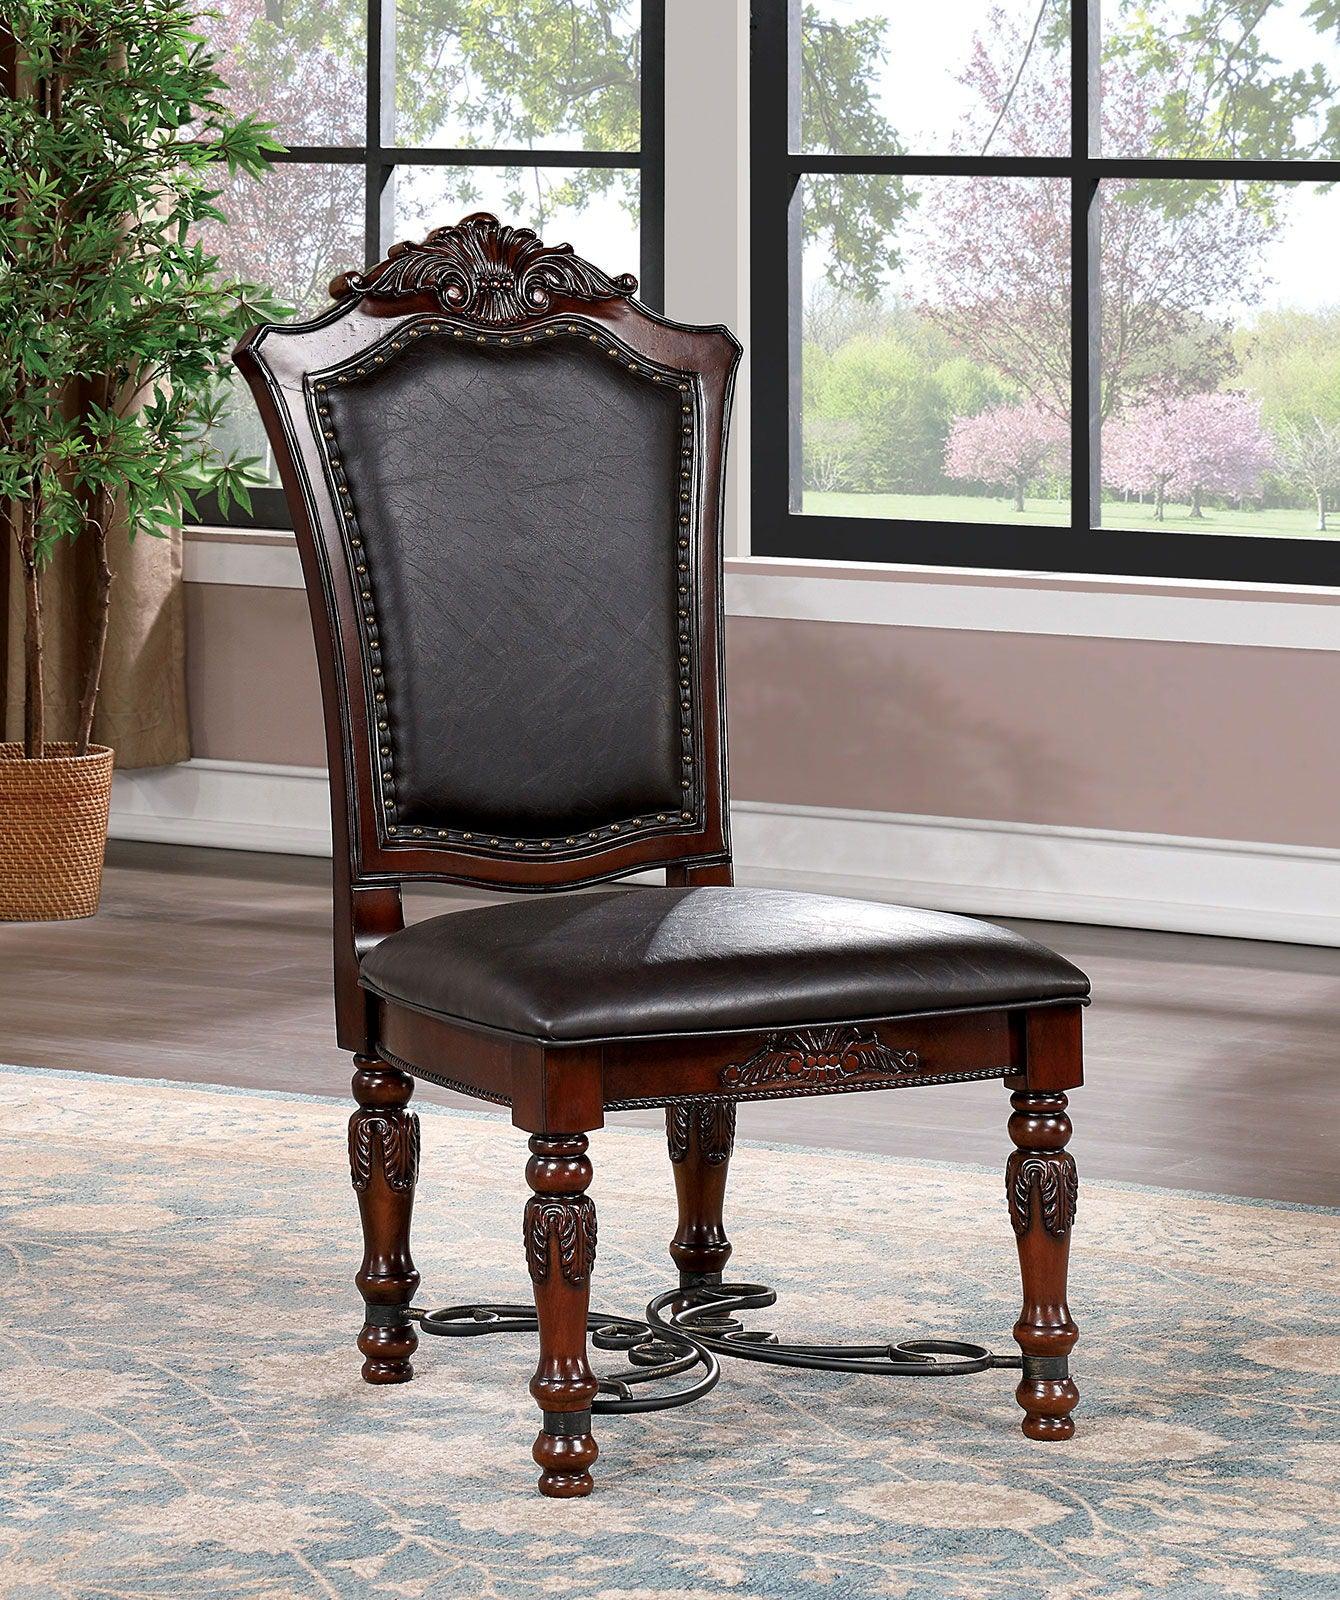 Furniture of America - Picardy - Side Chair (Set of 2) - Brown Cherry / Black - 5th Avenue Furniture